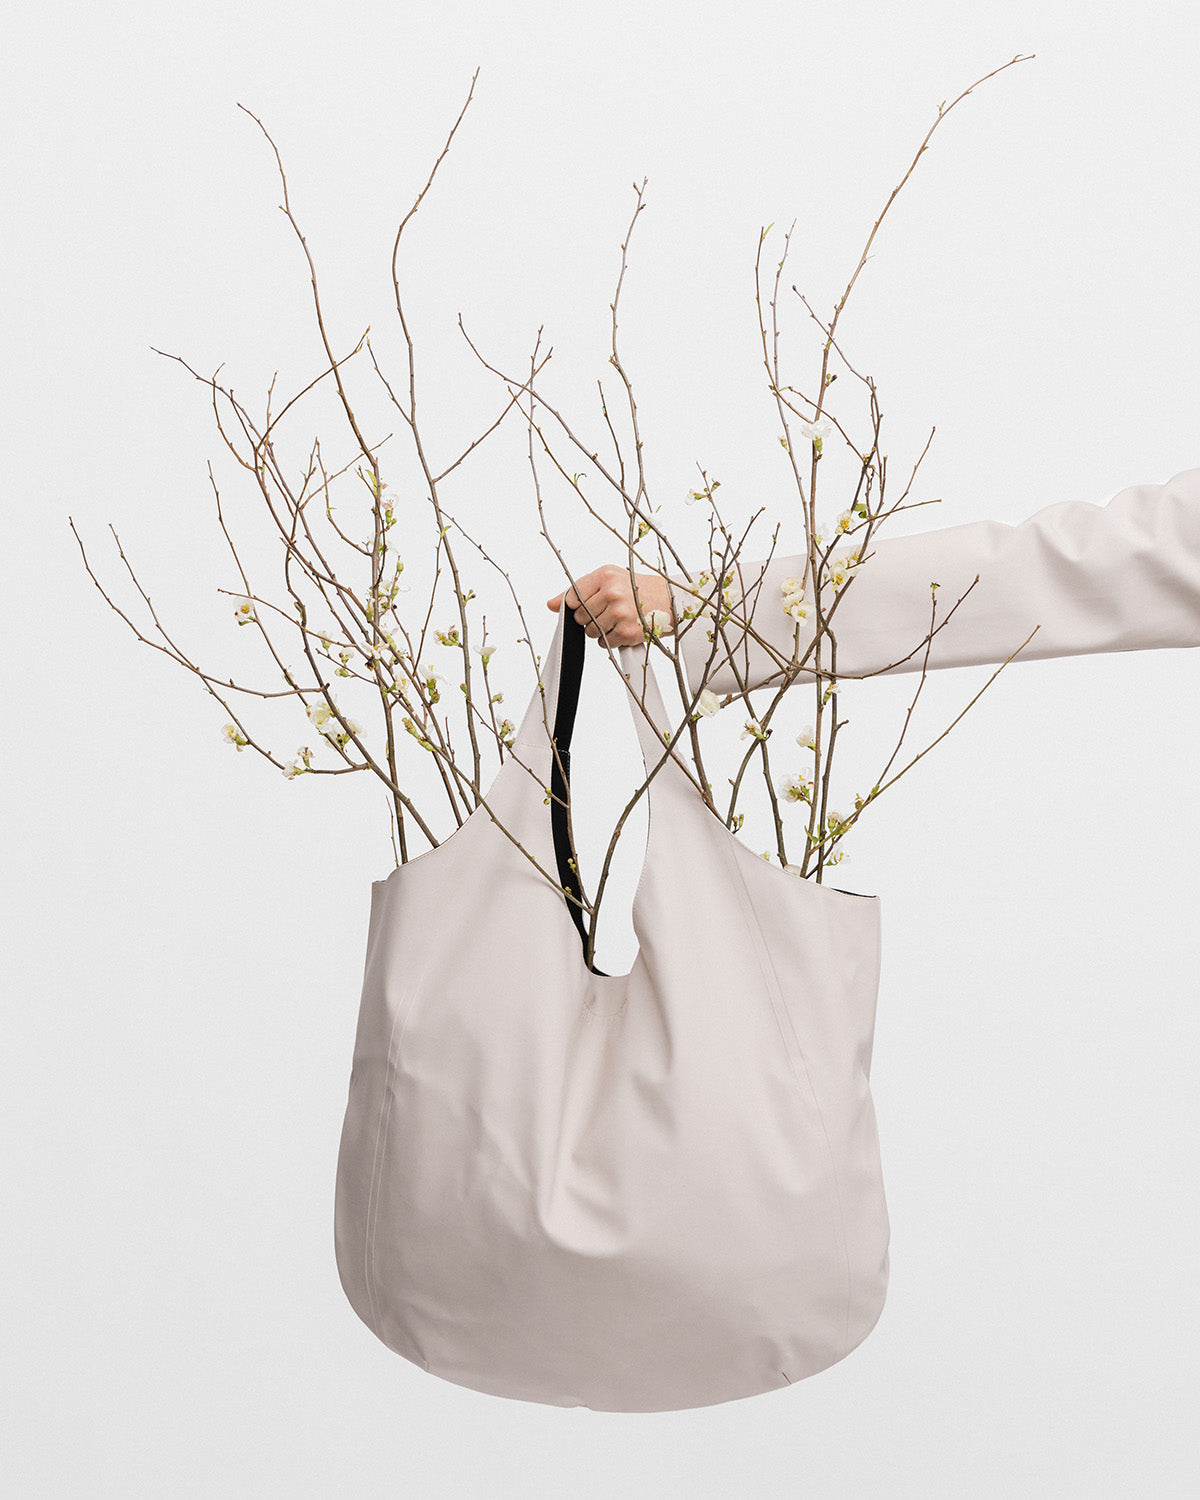 Tote Bag in color light sand by Stutterheim decorated with flowers